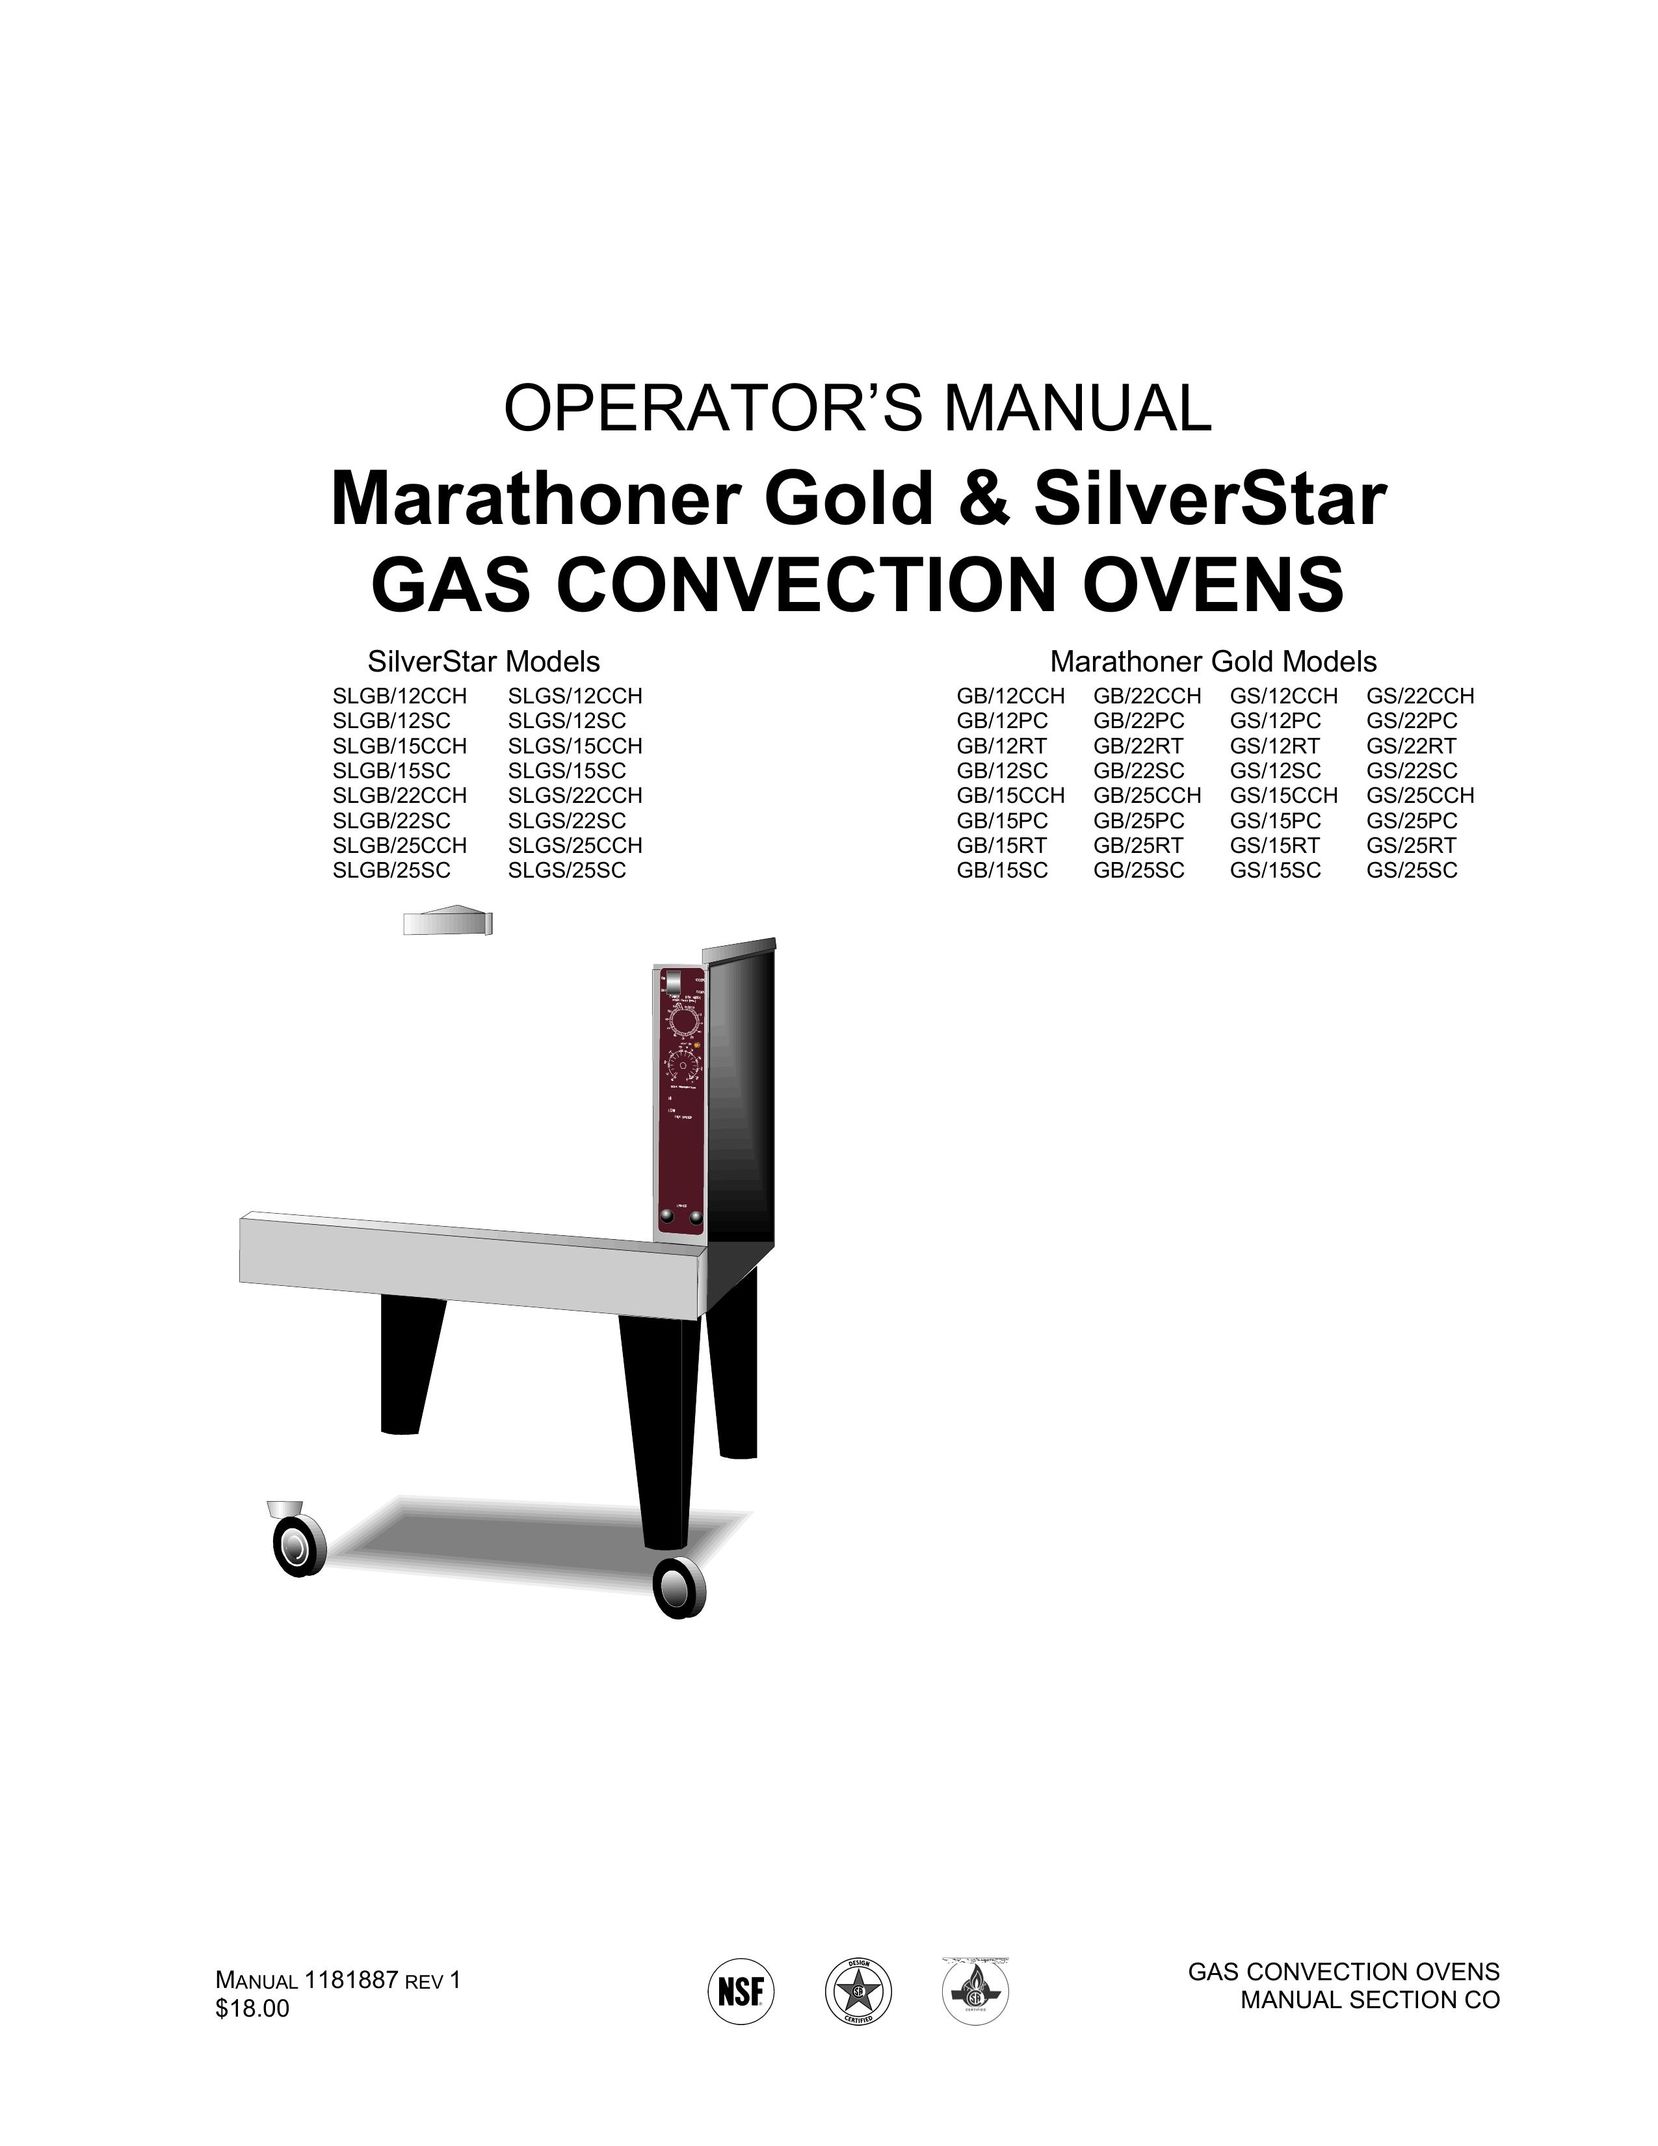 Southbend SLGB/15SC Oven User Manual